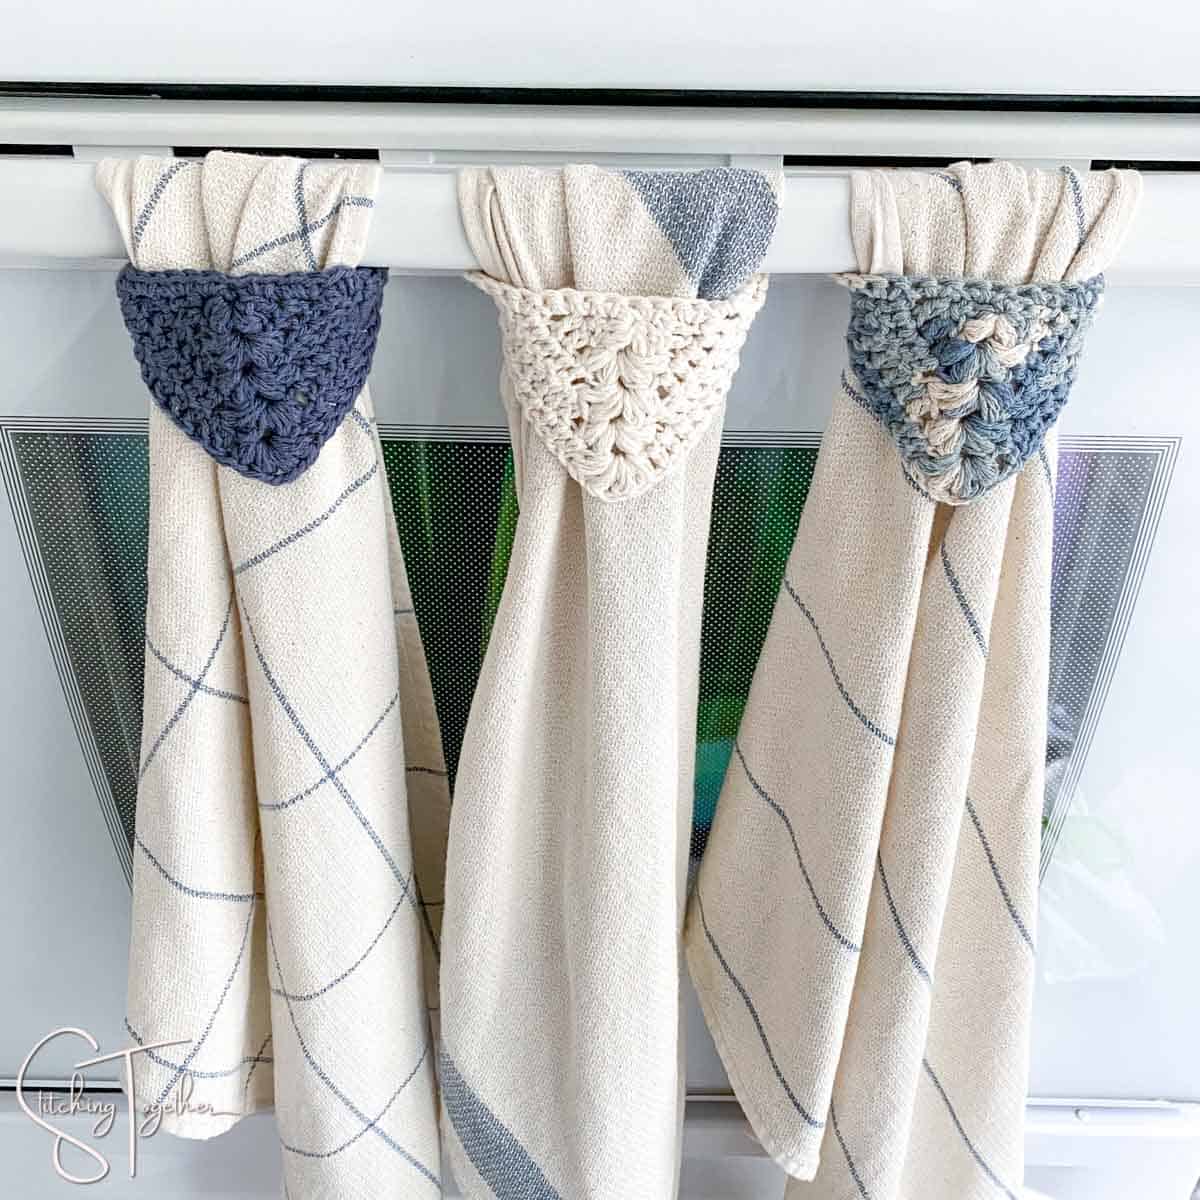 https://www.stitching-together.com/wp-content/uploads/2020/09/Easy-Crochet-Kitchen-Towel-Topper.jpg